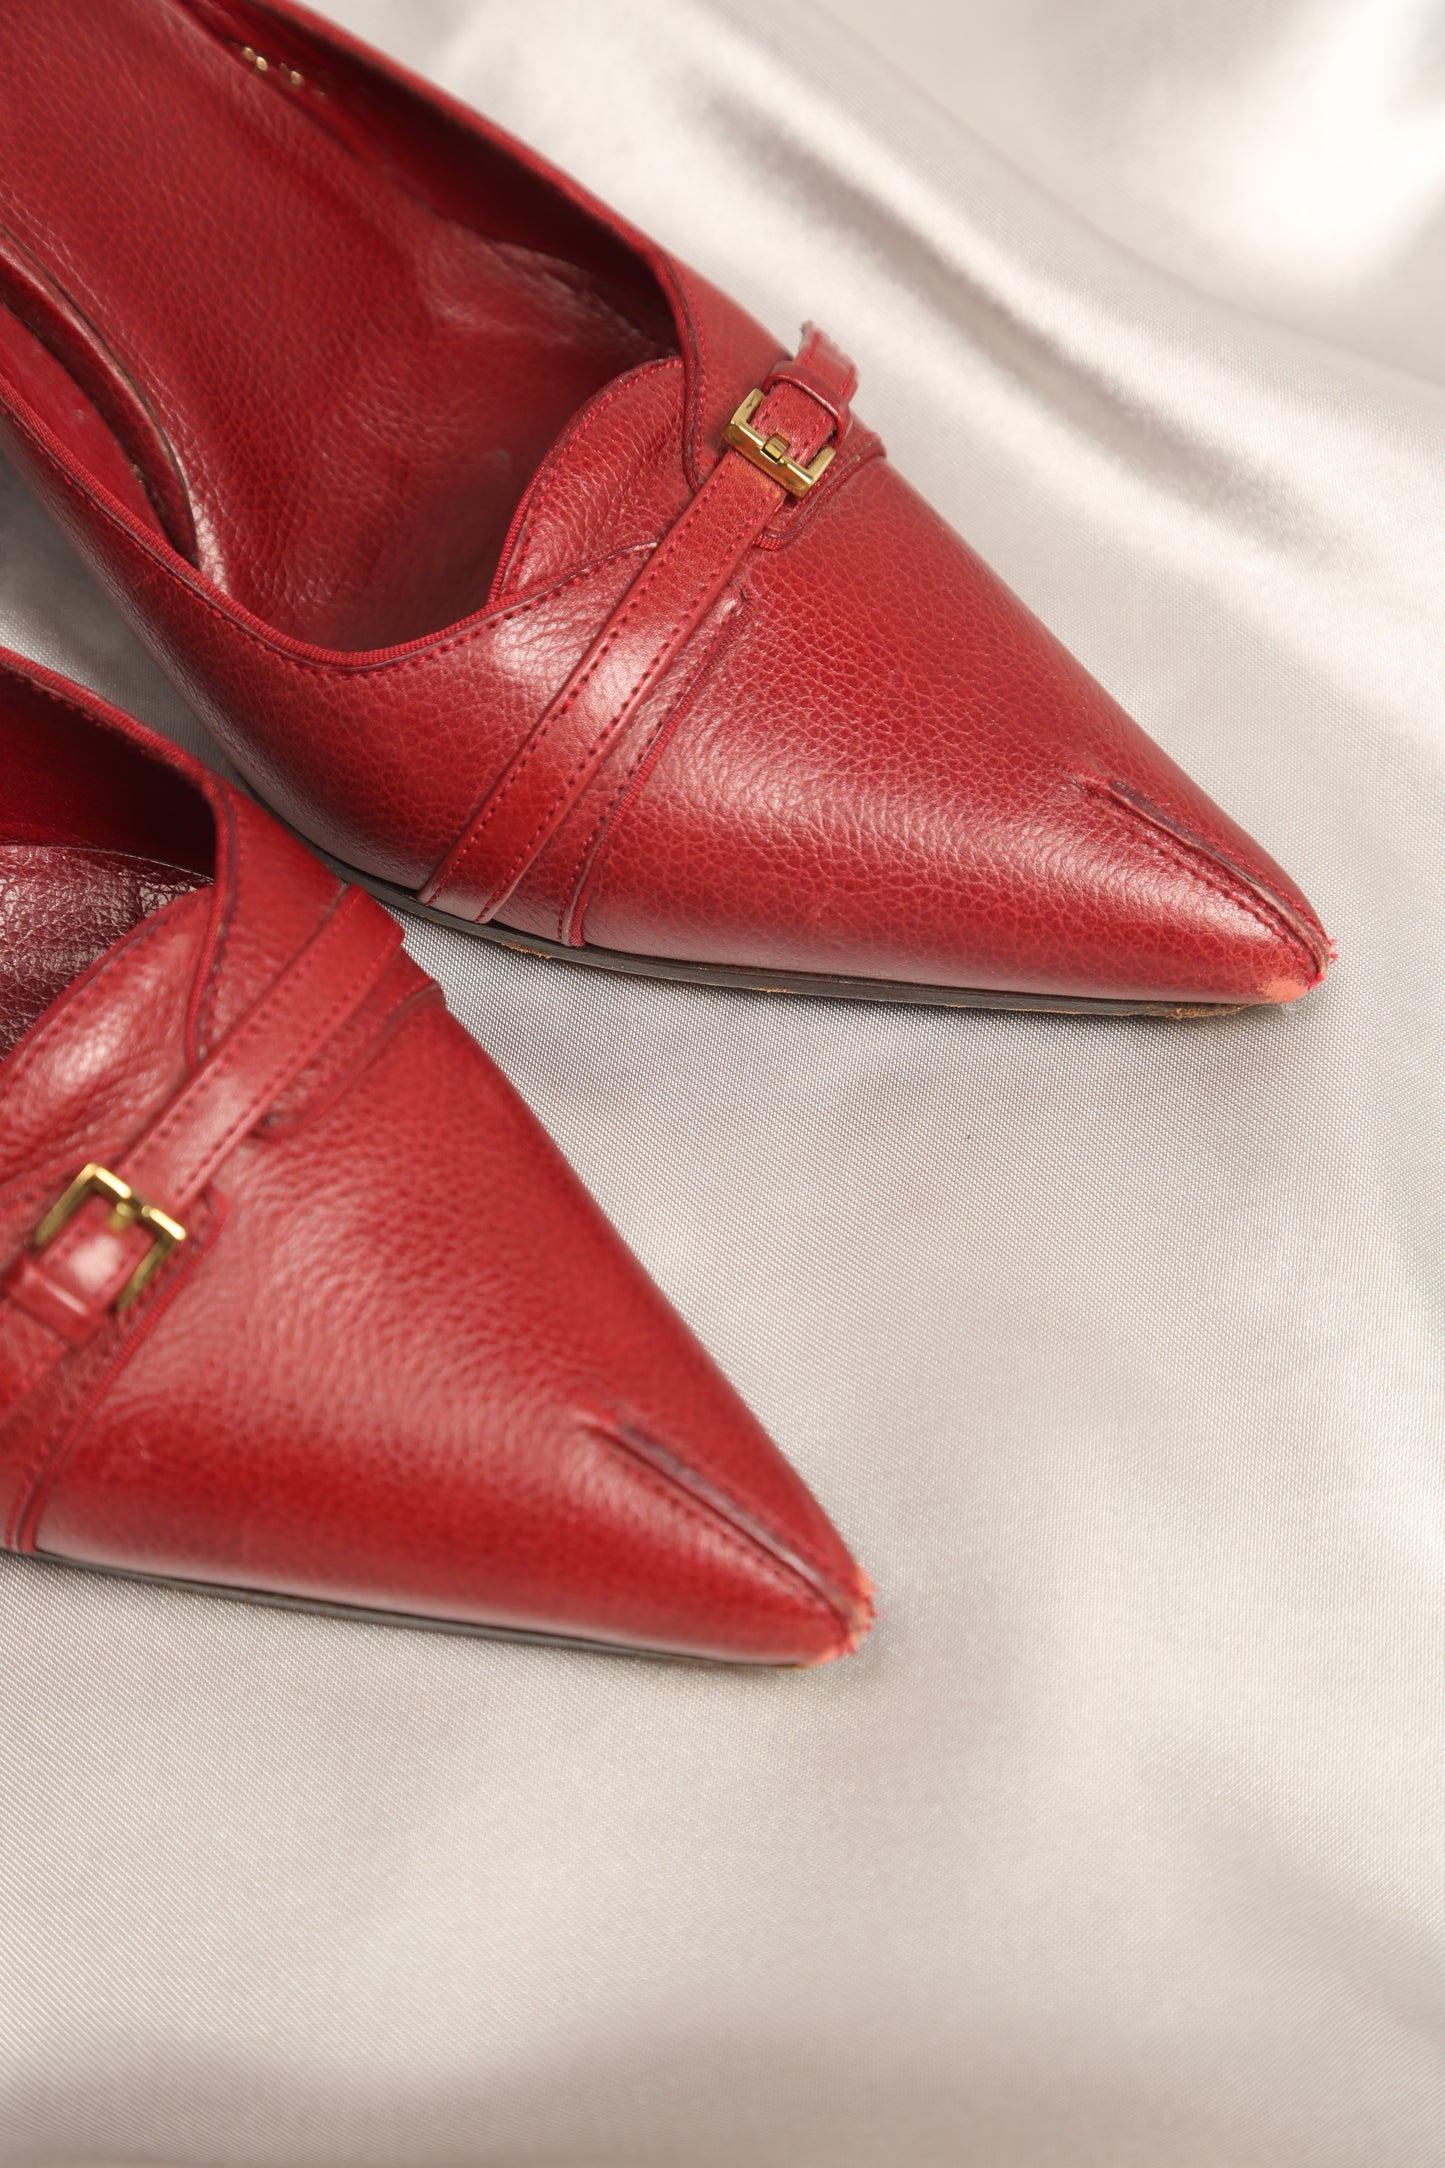 Extremely Rare GUCCI Burgundy Mules